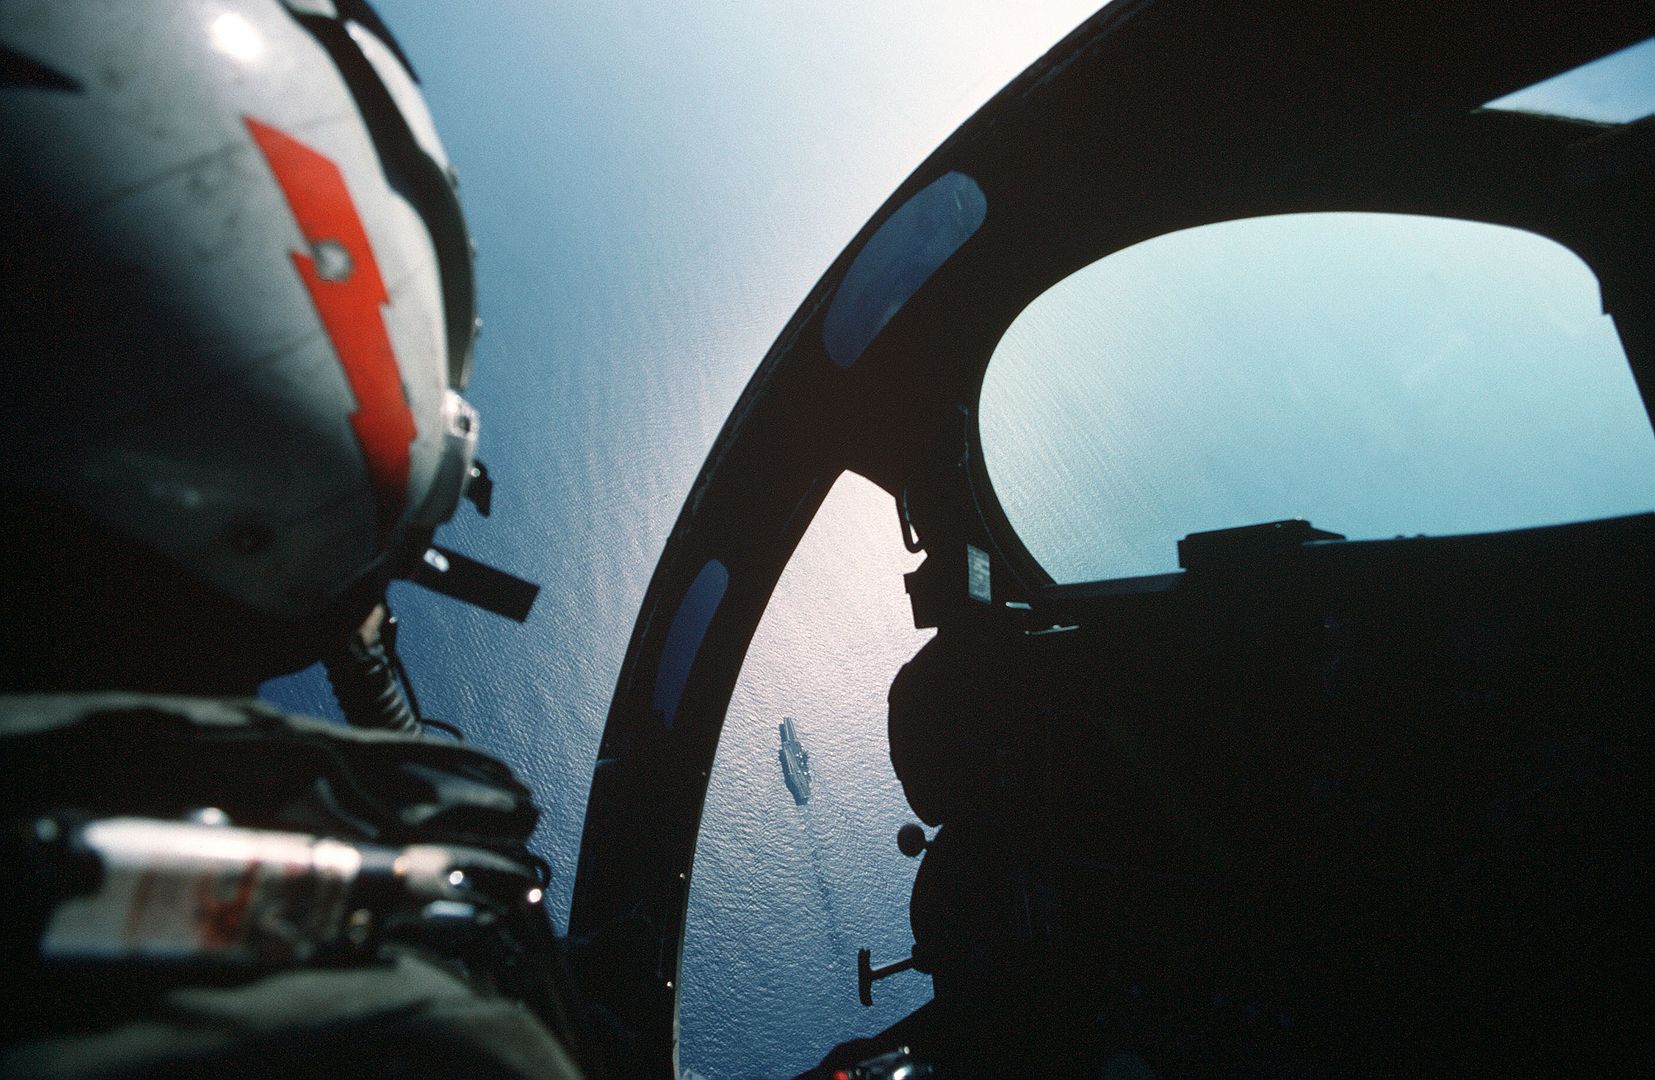 A View From The Cockpit Of An Attack Squadron 176 KA 6D Intruder Aircraft As It Approaches The Stern Of The Aircraft Carrier USS FORRESTAL 1